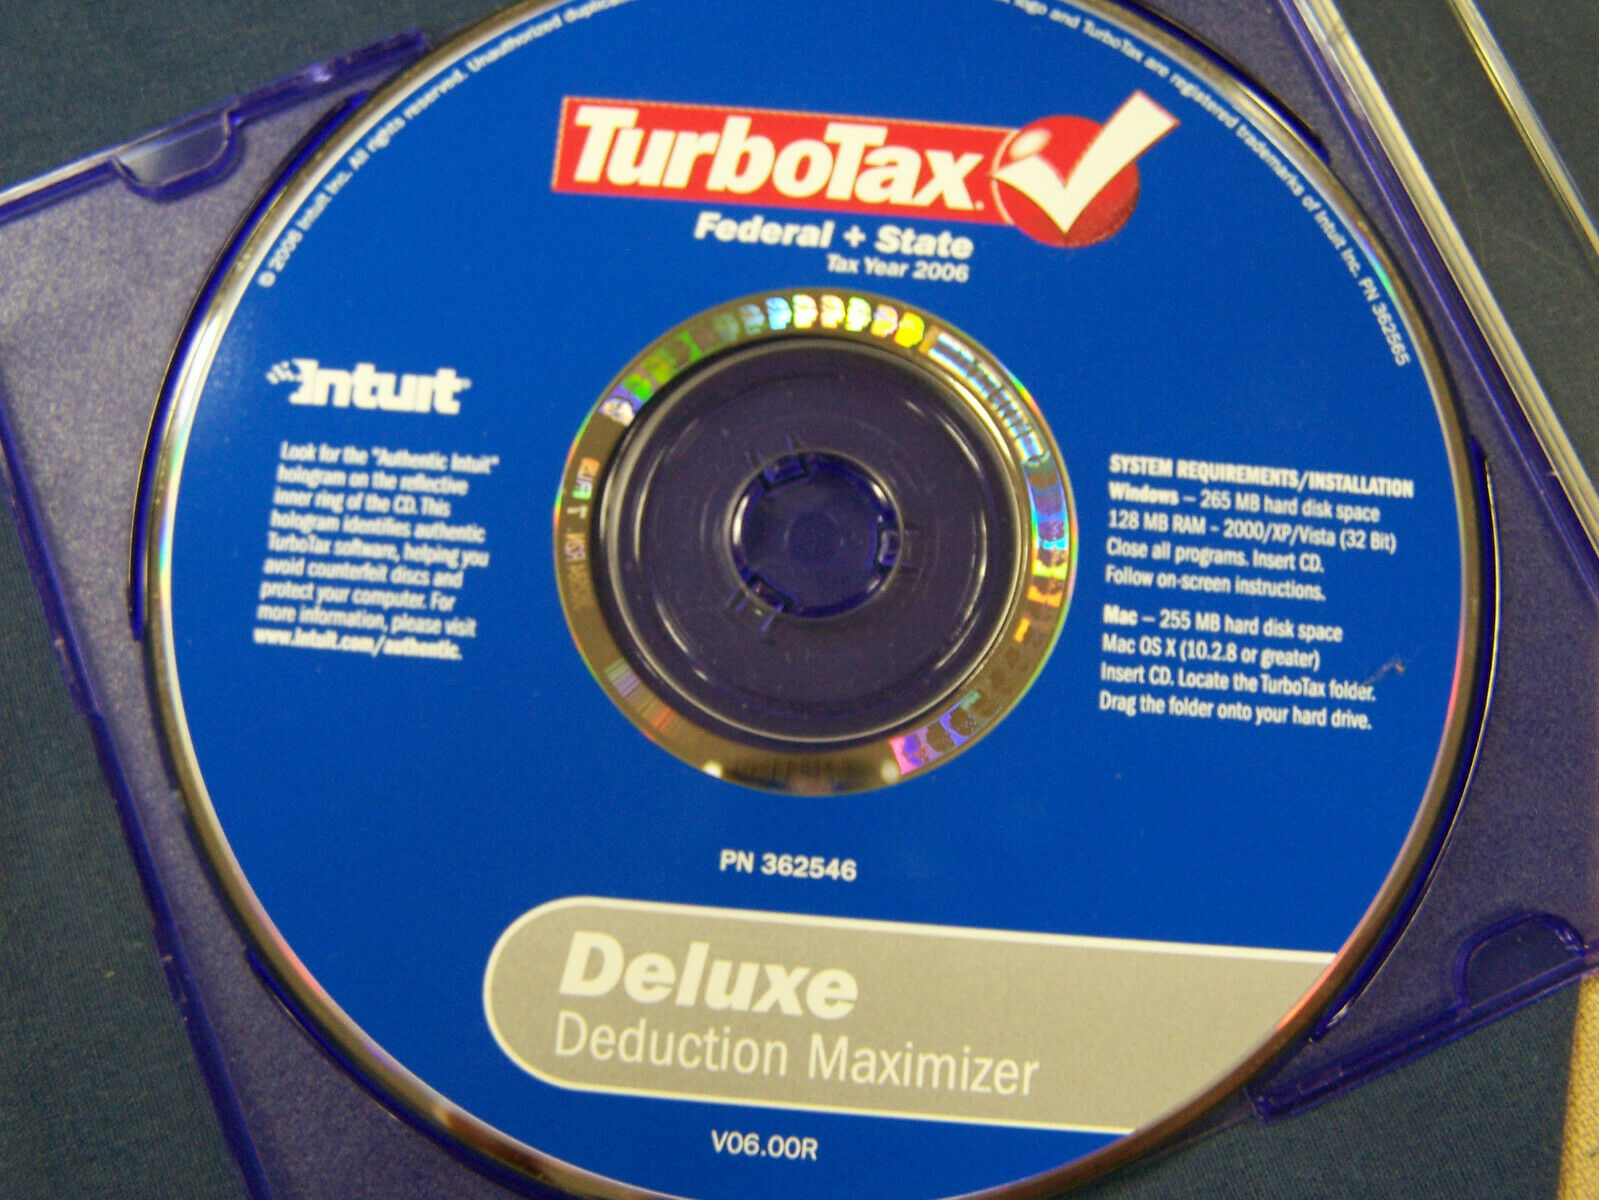 Turbotax tax year 2006 federal and state deluxe Intuit 362546 - $14.84